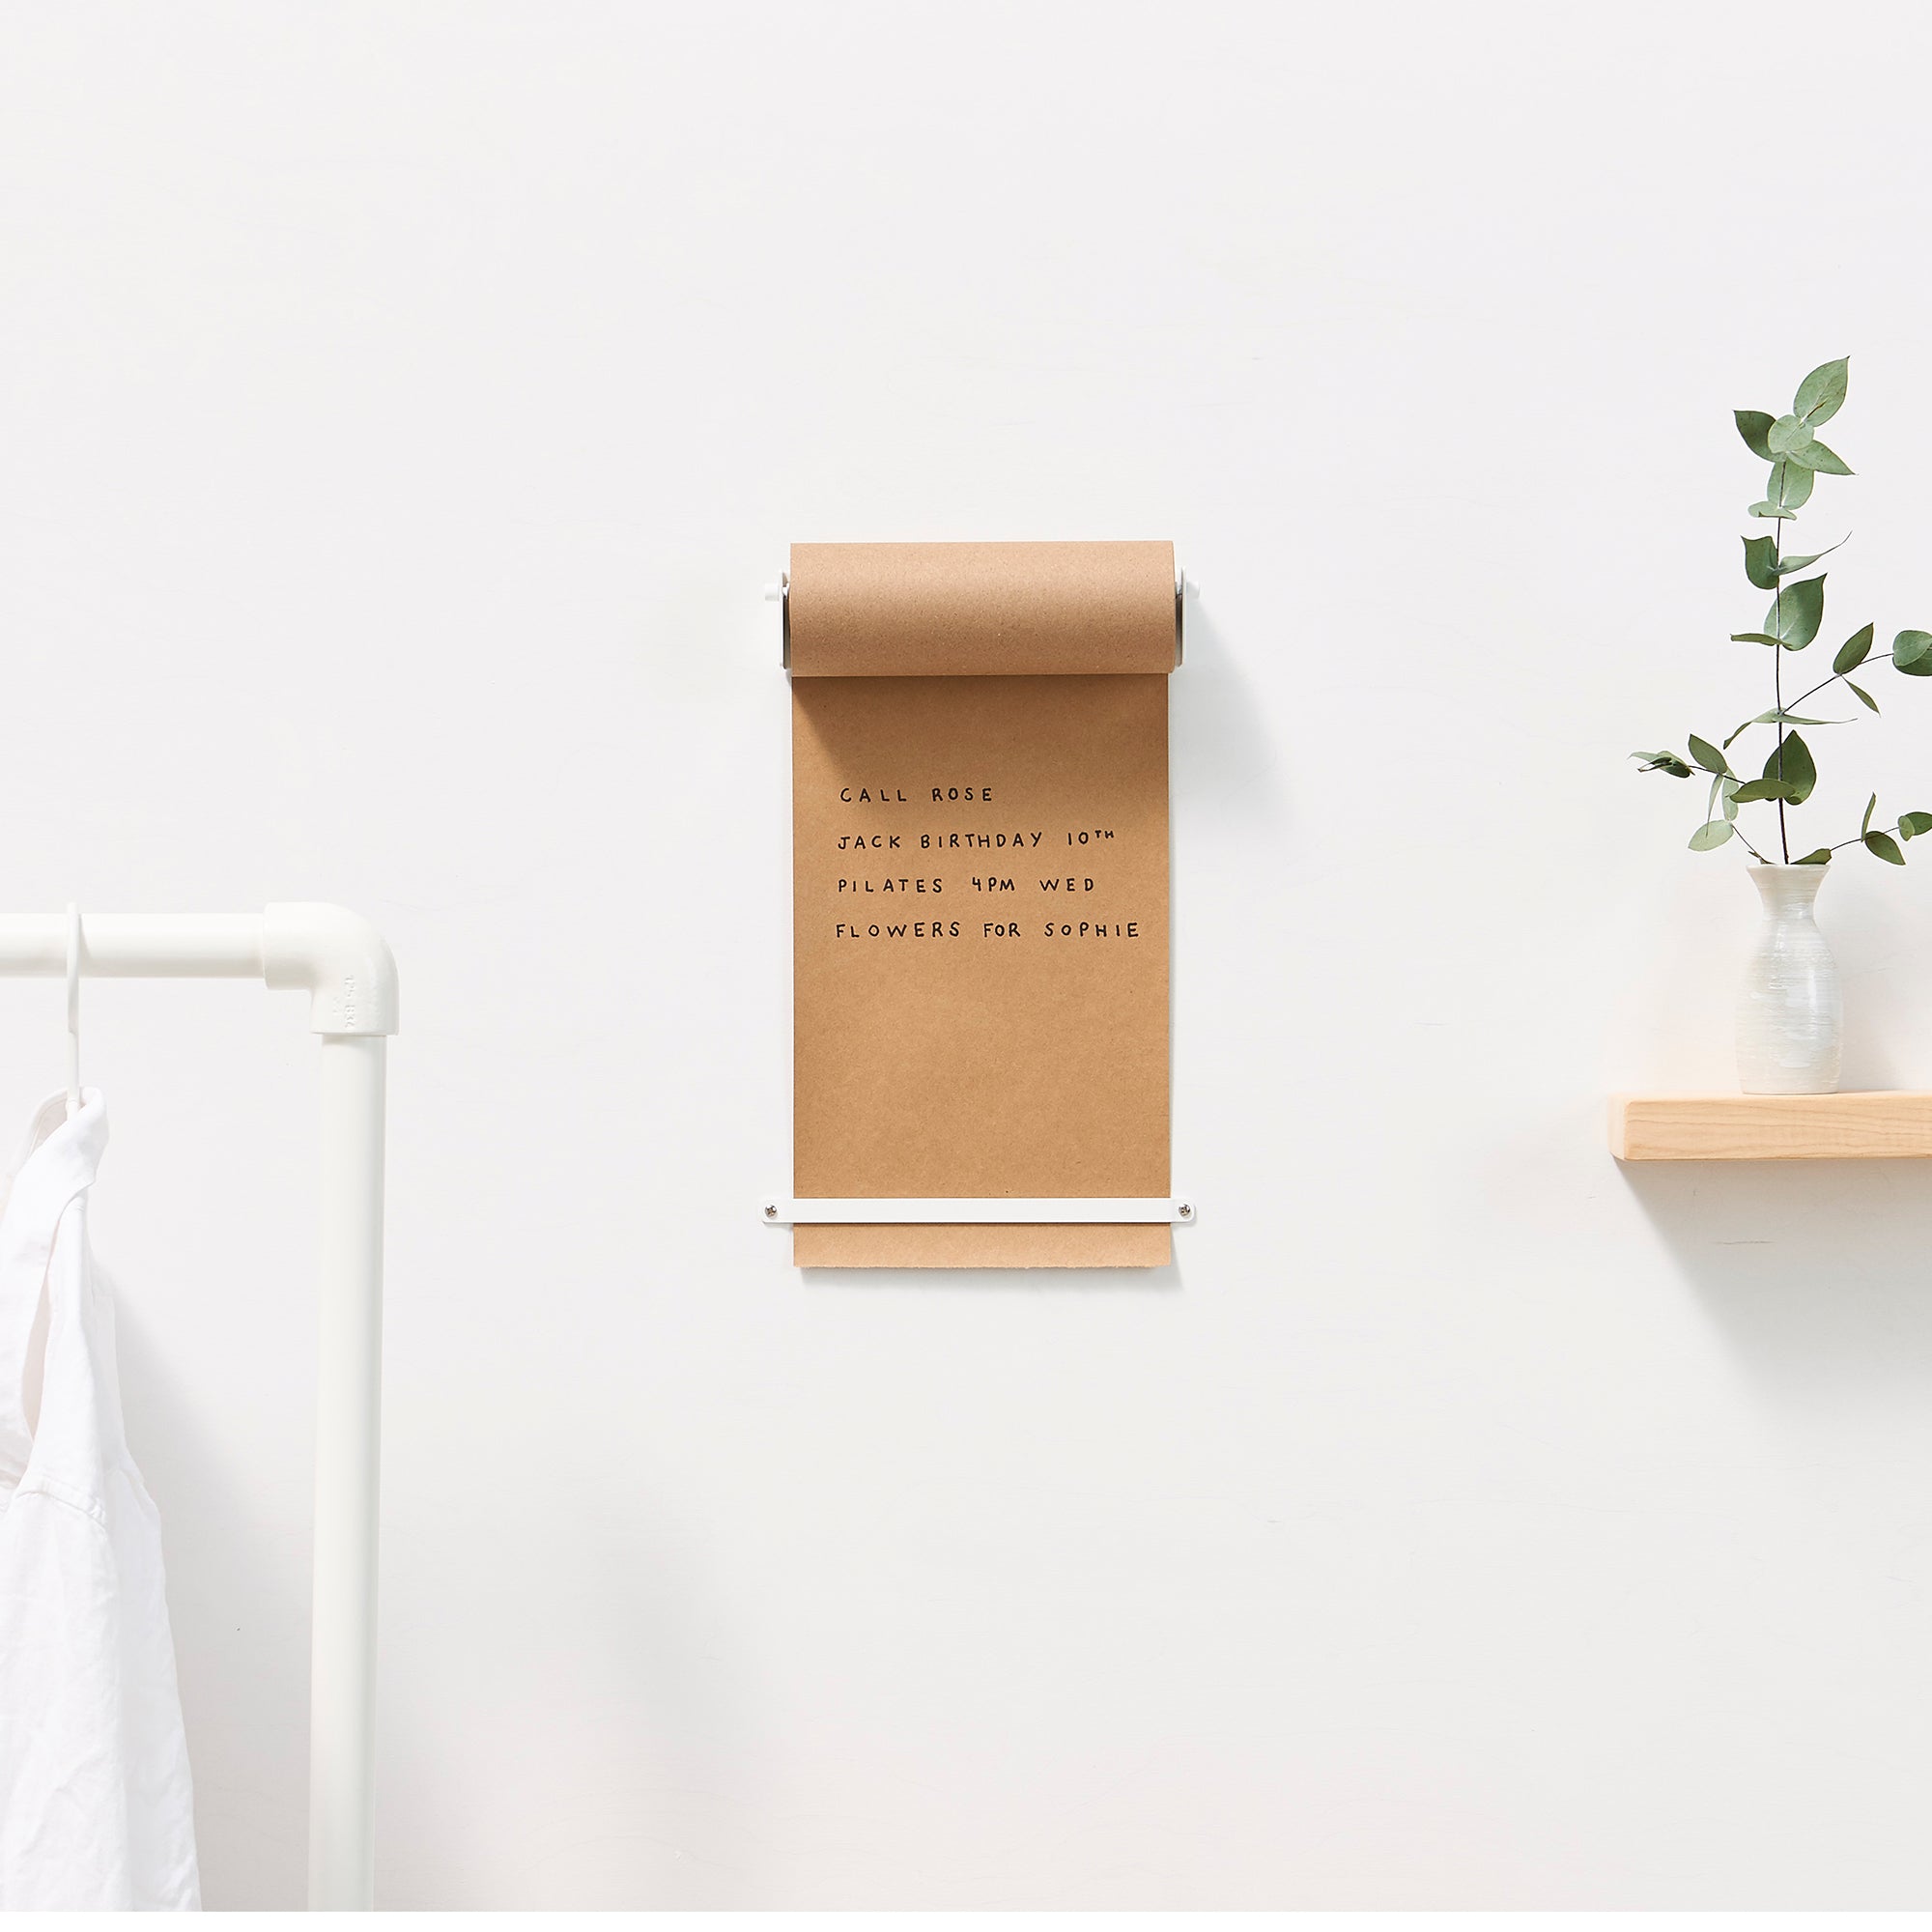 refillable kraft paper holder to install on wall of office or home